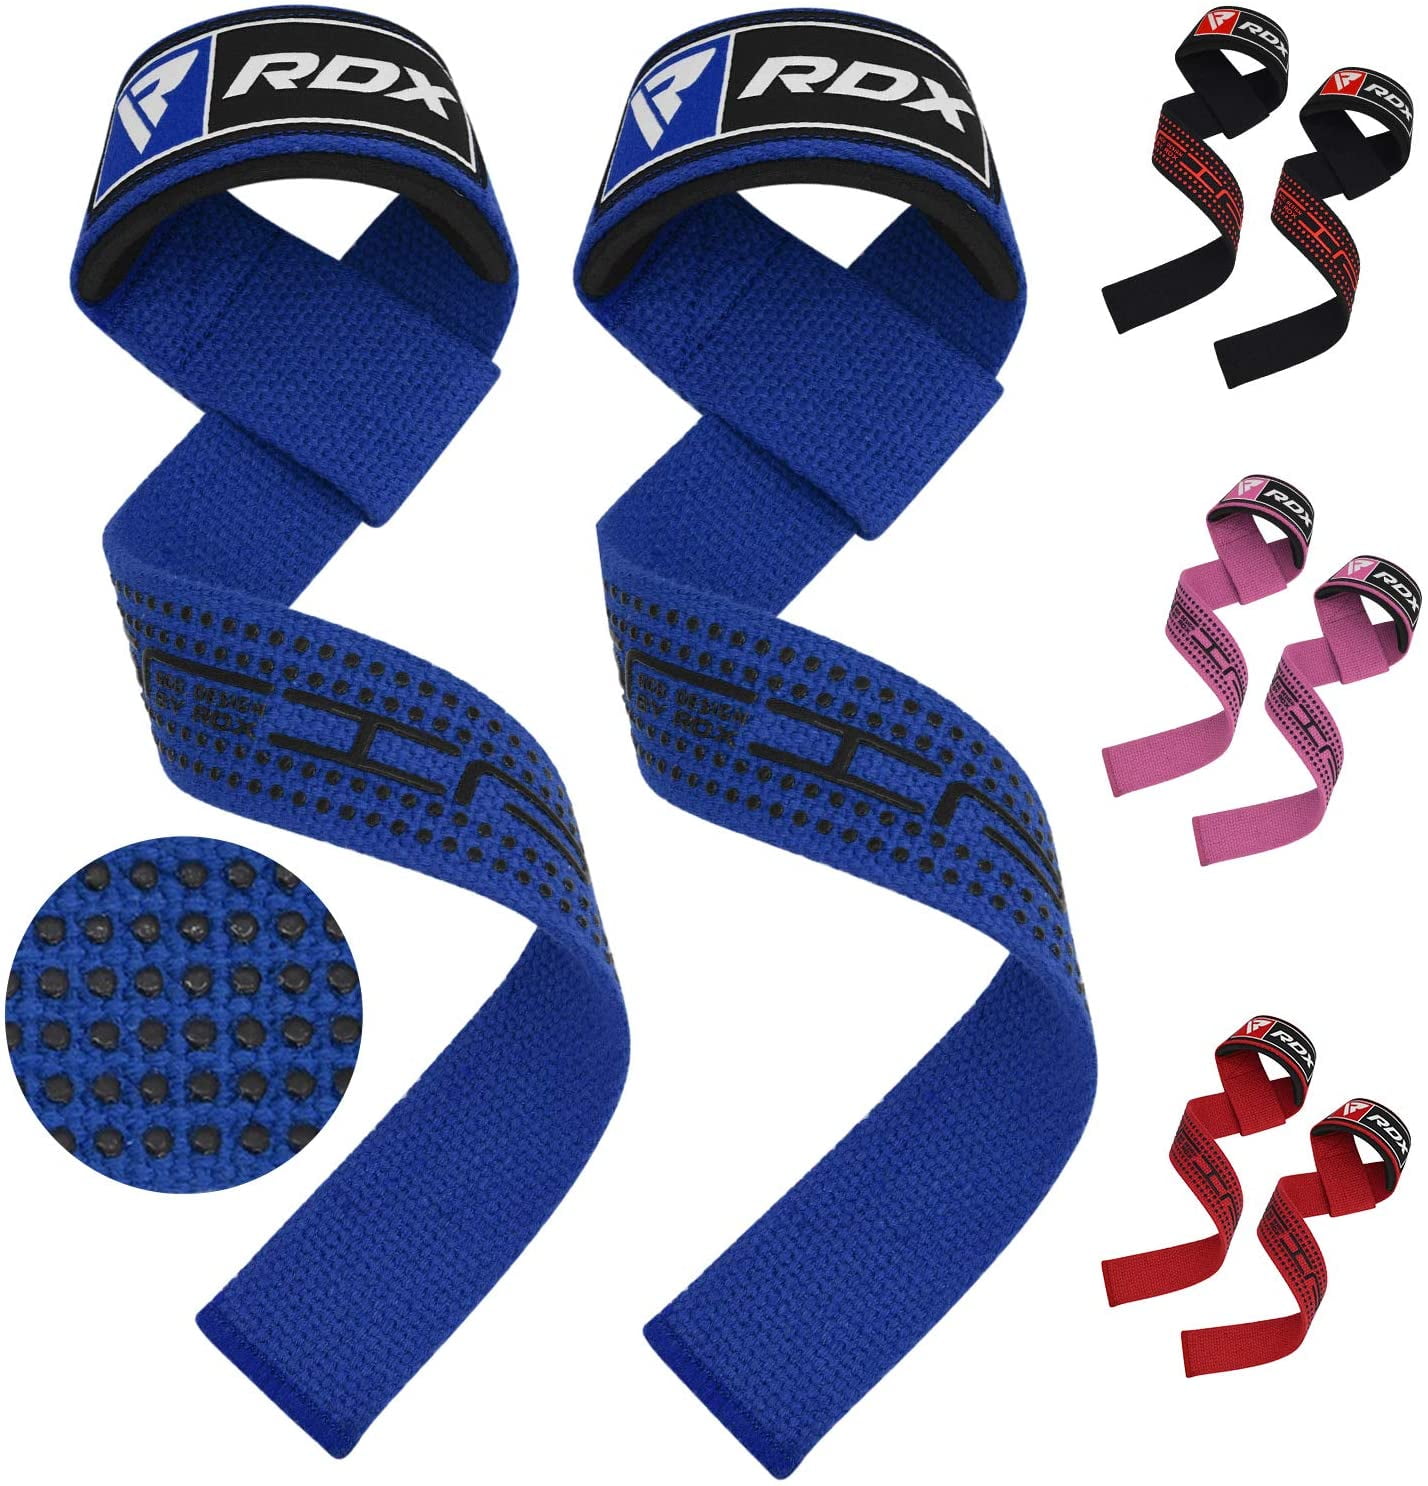 Workout and Xfit Exercise Great for Strength Training Bodybuilding Powerlifting Gymnastics RDX Weight Lifting Gym Grips 